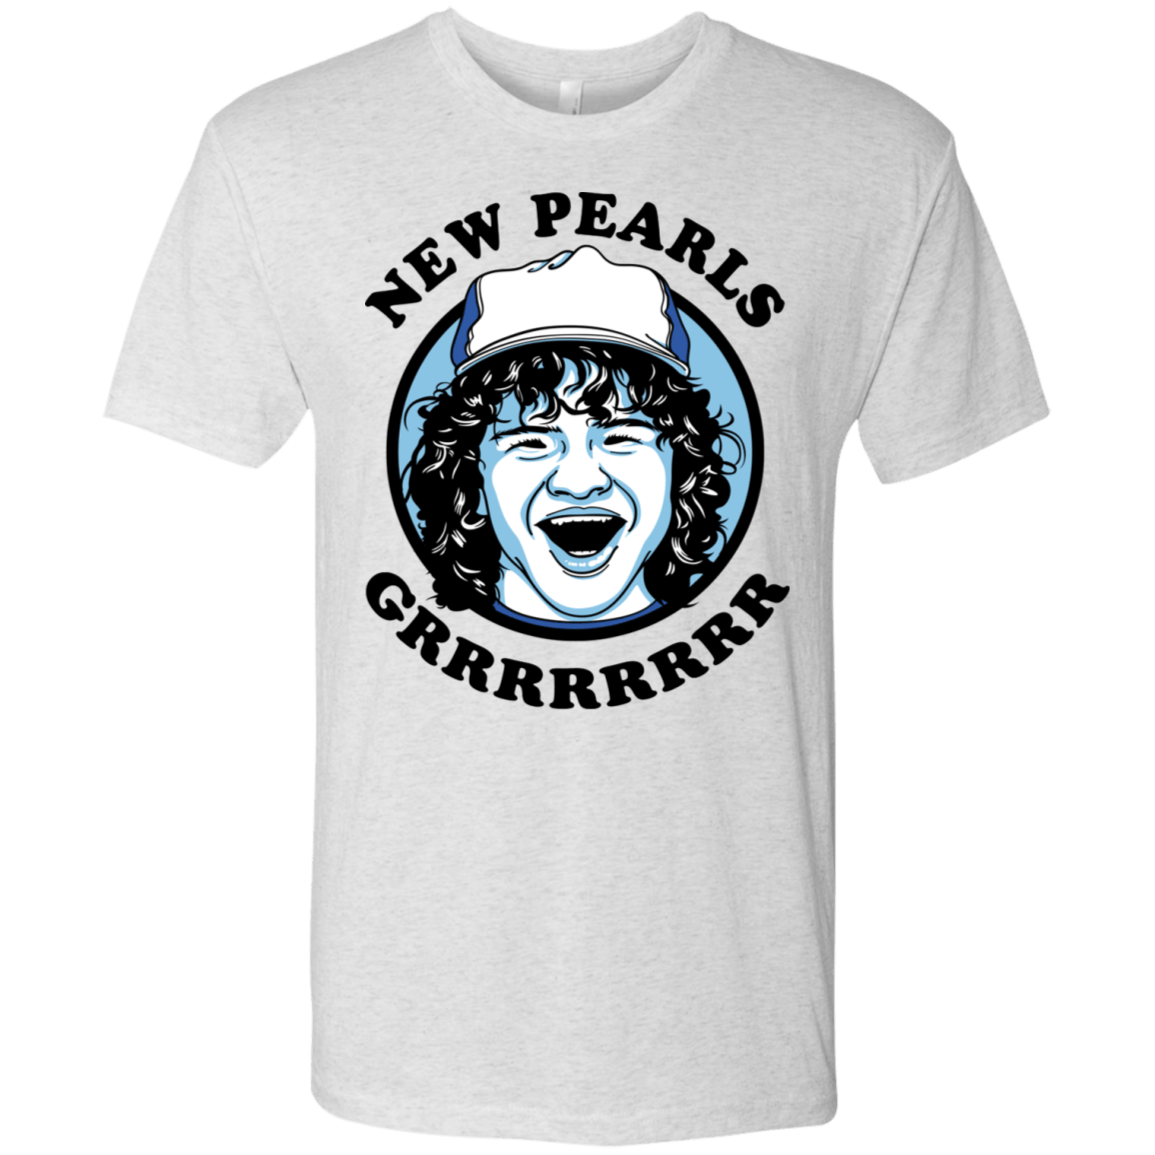 T-Shirts Heather White / S New Pearls Men's Triblend T-Shirt